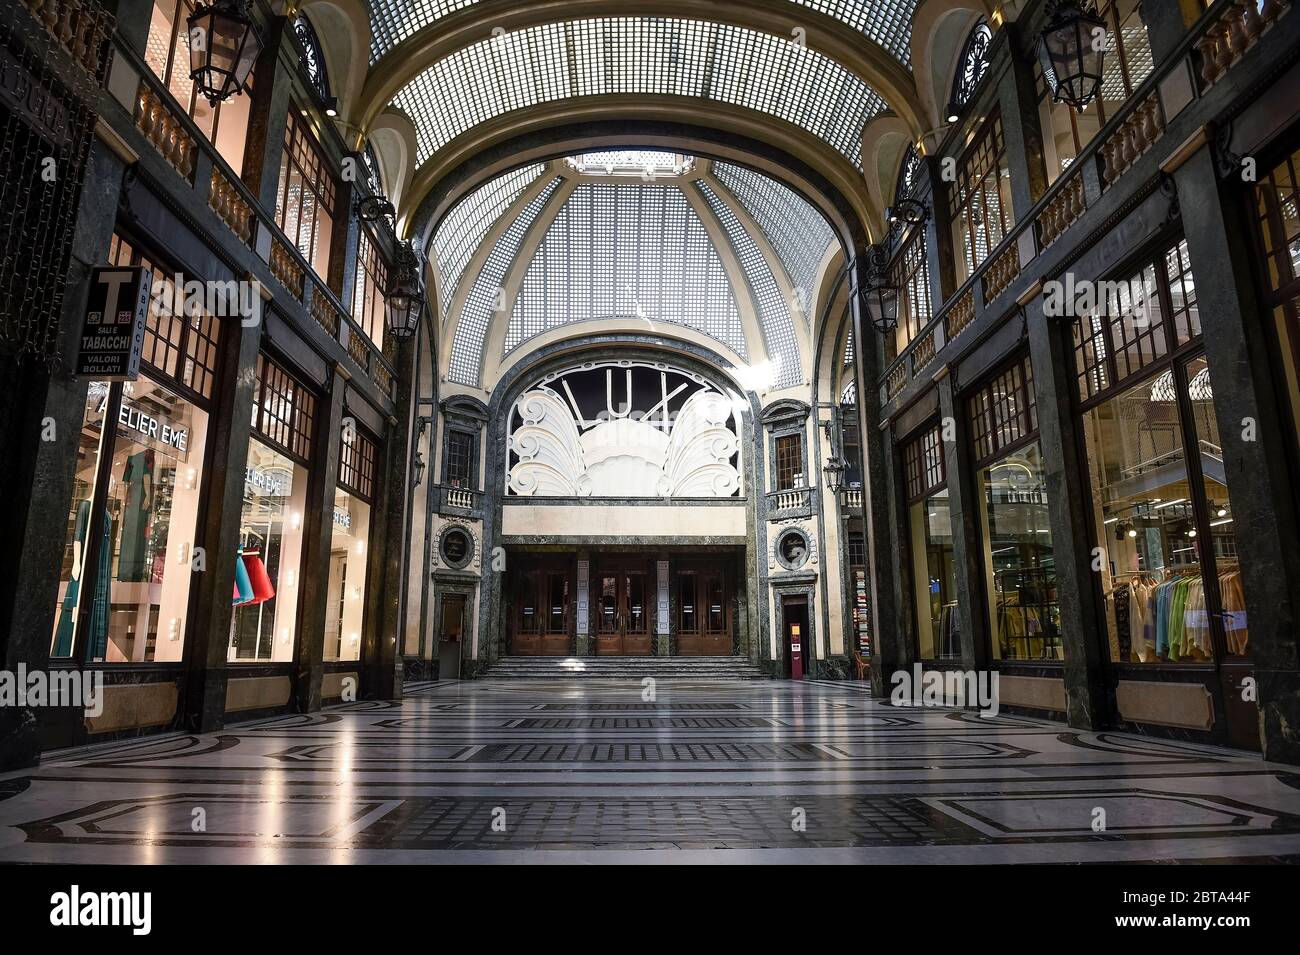 Turin, Italy - 10 March, 2020: General view of closed cinema Lux in Galleria San Federico. The Italian government puts the whole country on lockdown as Italy is battling the world's second-most deadly COVID-19 coronavirus outbreak after China. Credit: Nicolò Campo/Alamy Live News Stock Photo